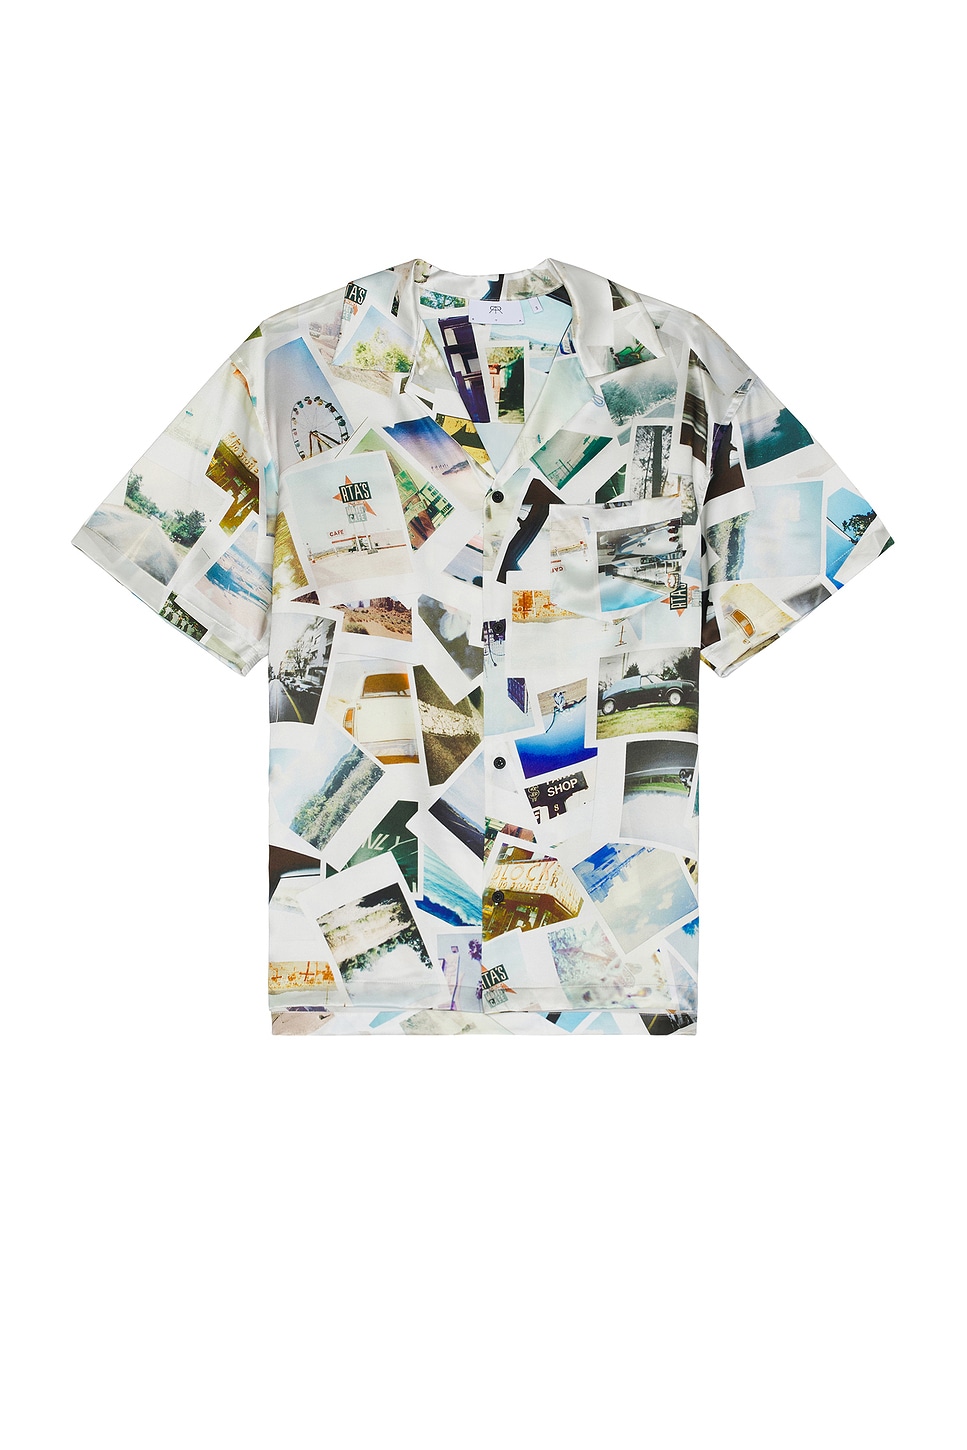 Image 1 of RTA Silk Print Short Sleeve Shirt in Photo Collage